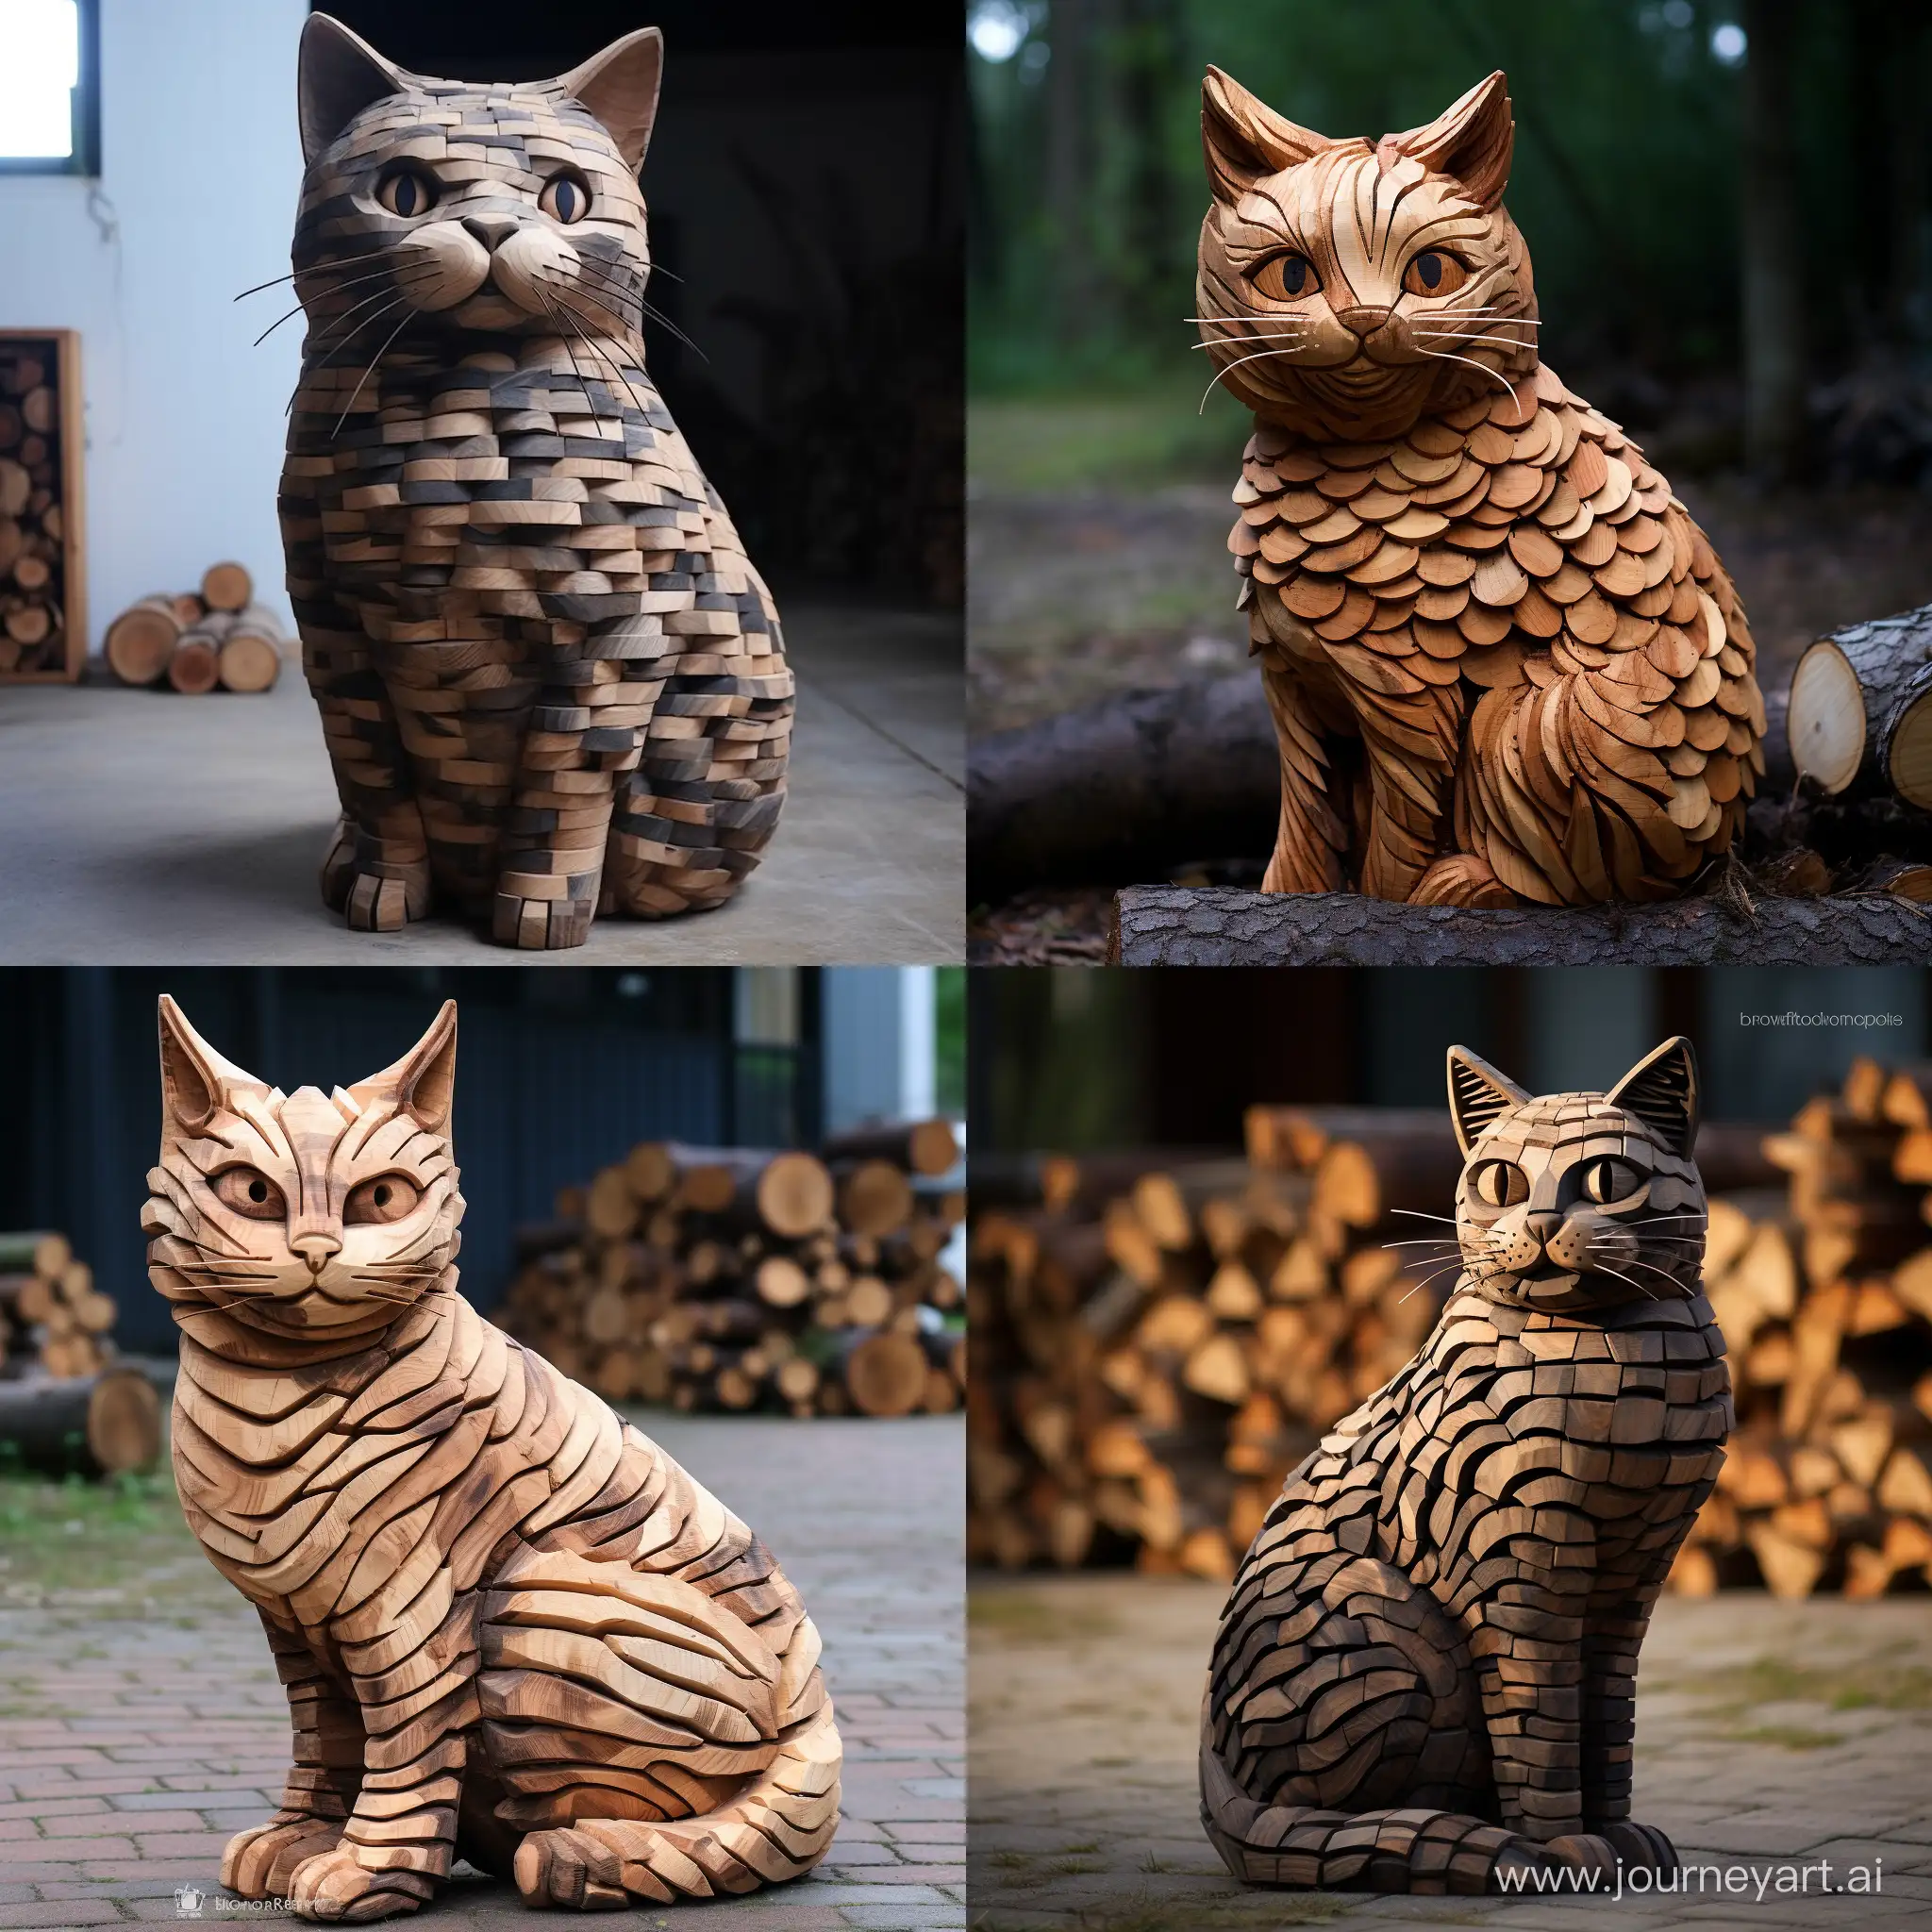 Adorable-Catshaped-Firewood-for-Cozy-Home-Ambiance